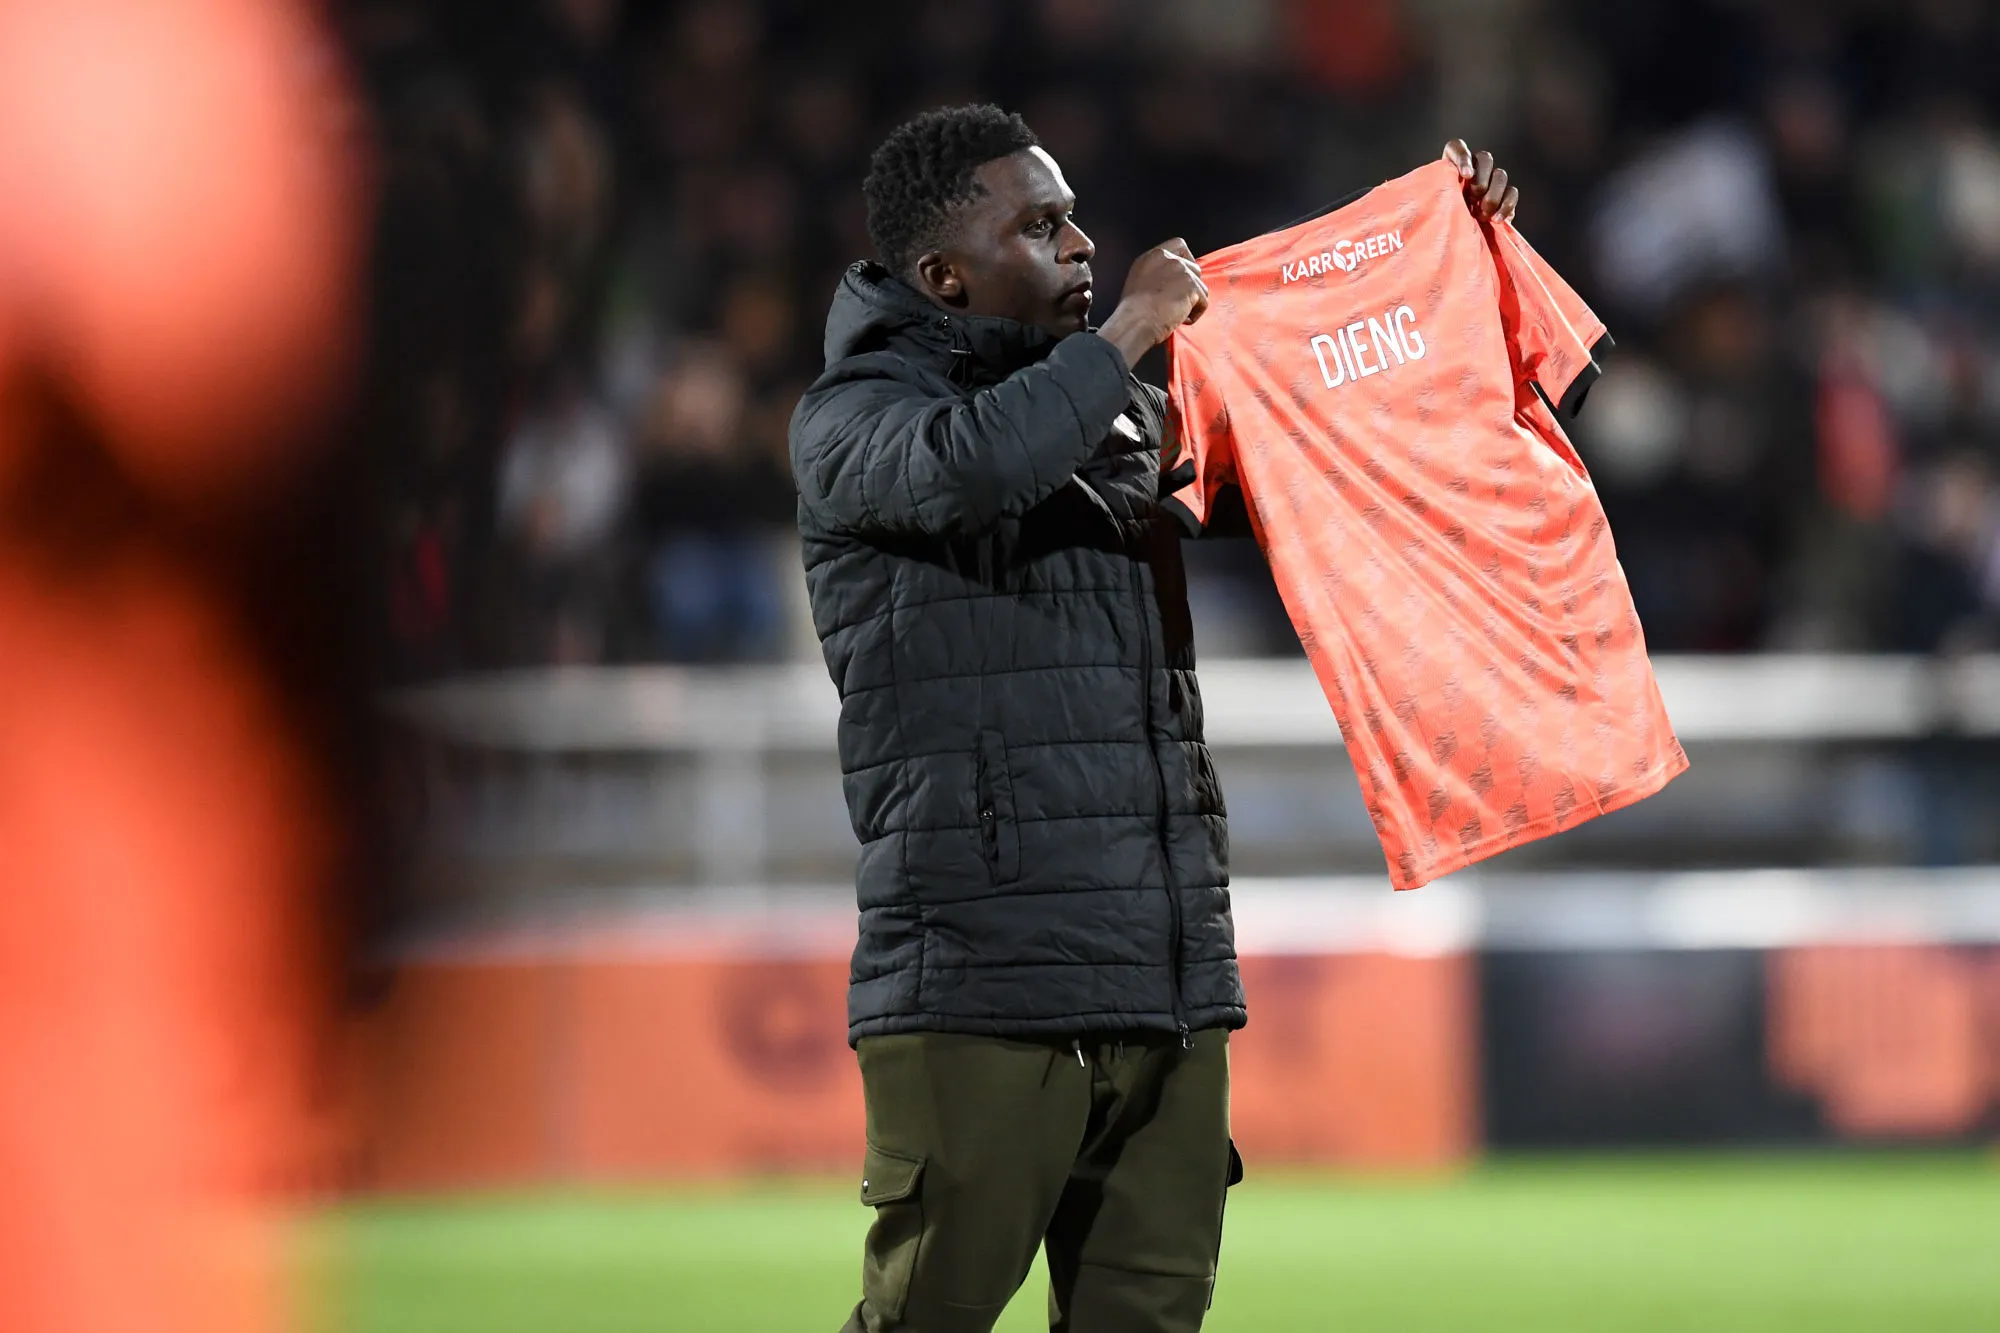 Bamba DIENG during the Ligue 1 Uber Eats match between Lorient and Rennes at Stade du Moustoir on January 27, 2023 in Lorient, France. (Photo by Philippe Lecoeur/FEP/Icon Sport)